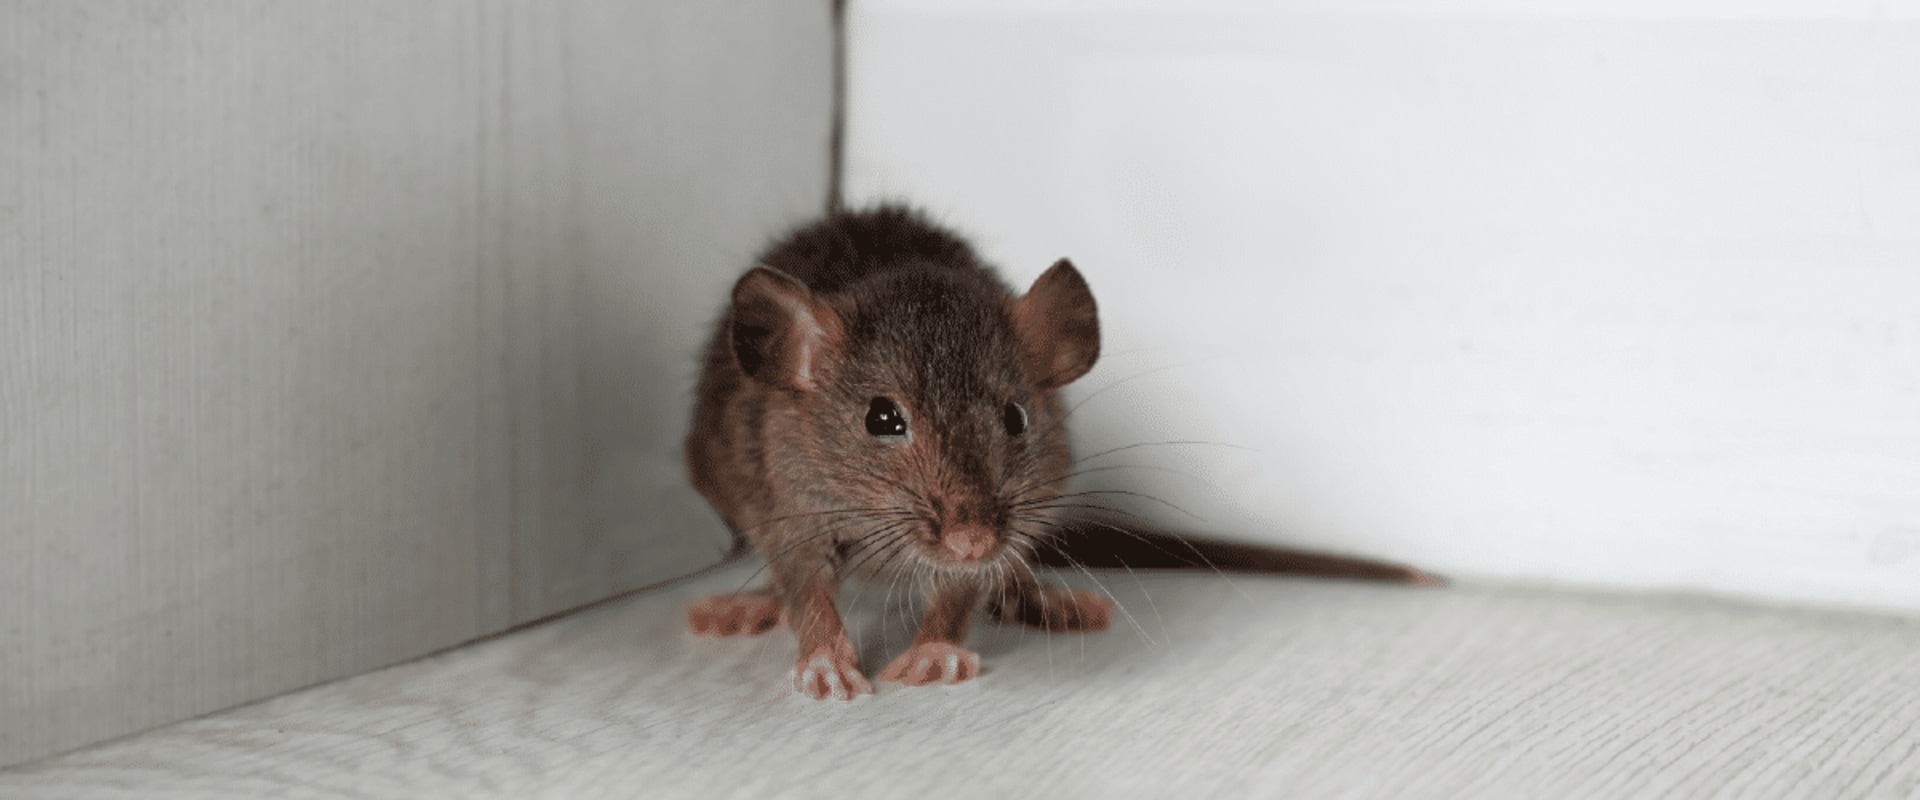 What are the six signs of rodent infestation?